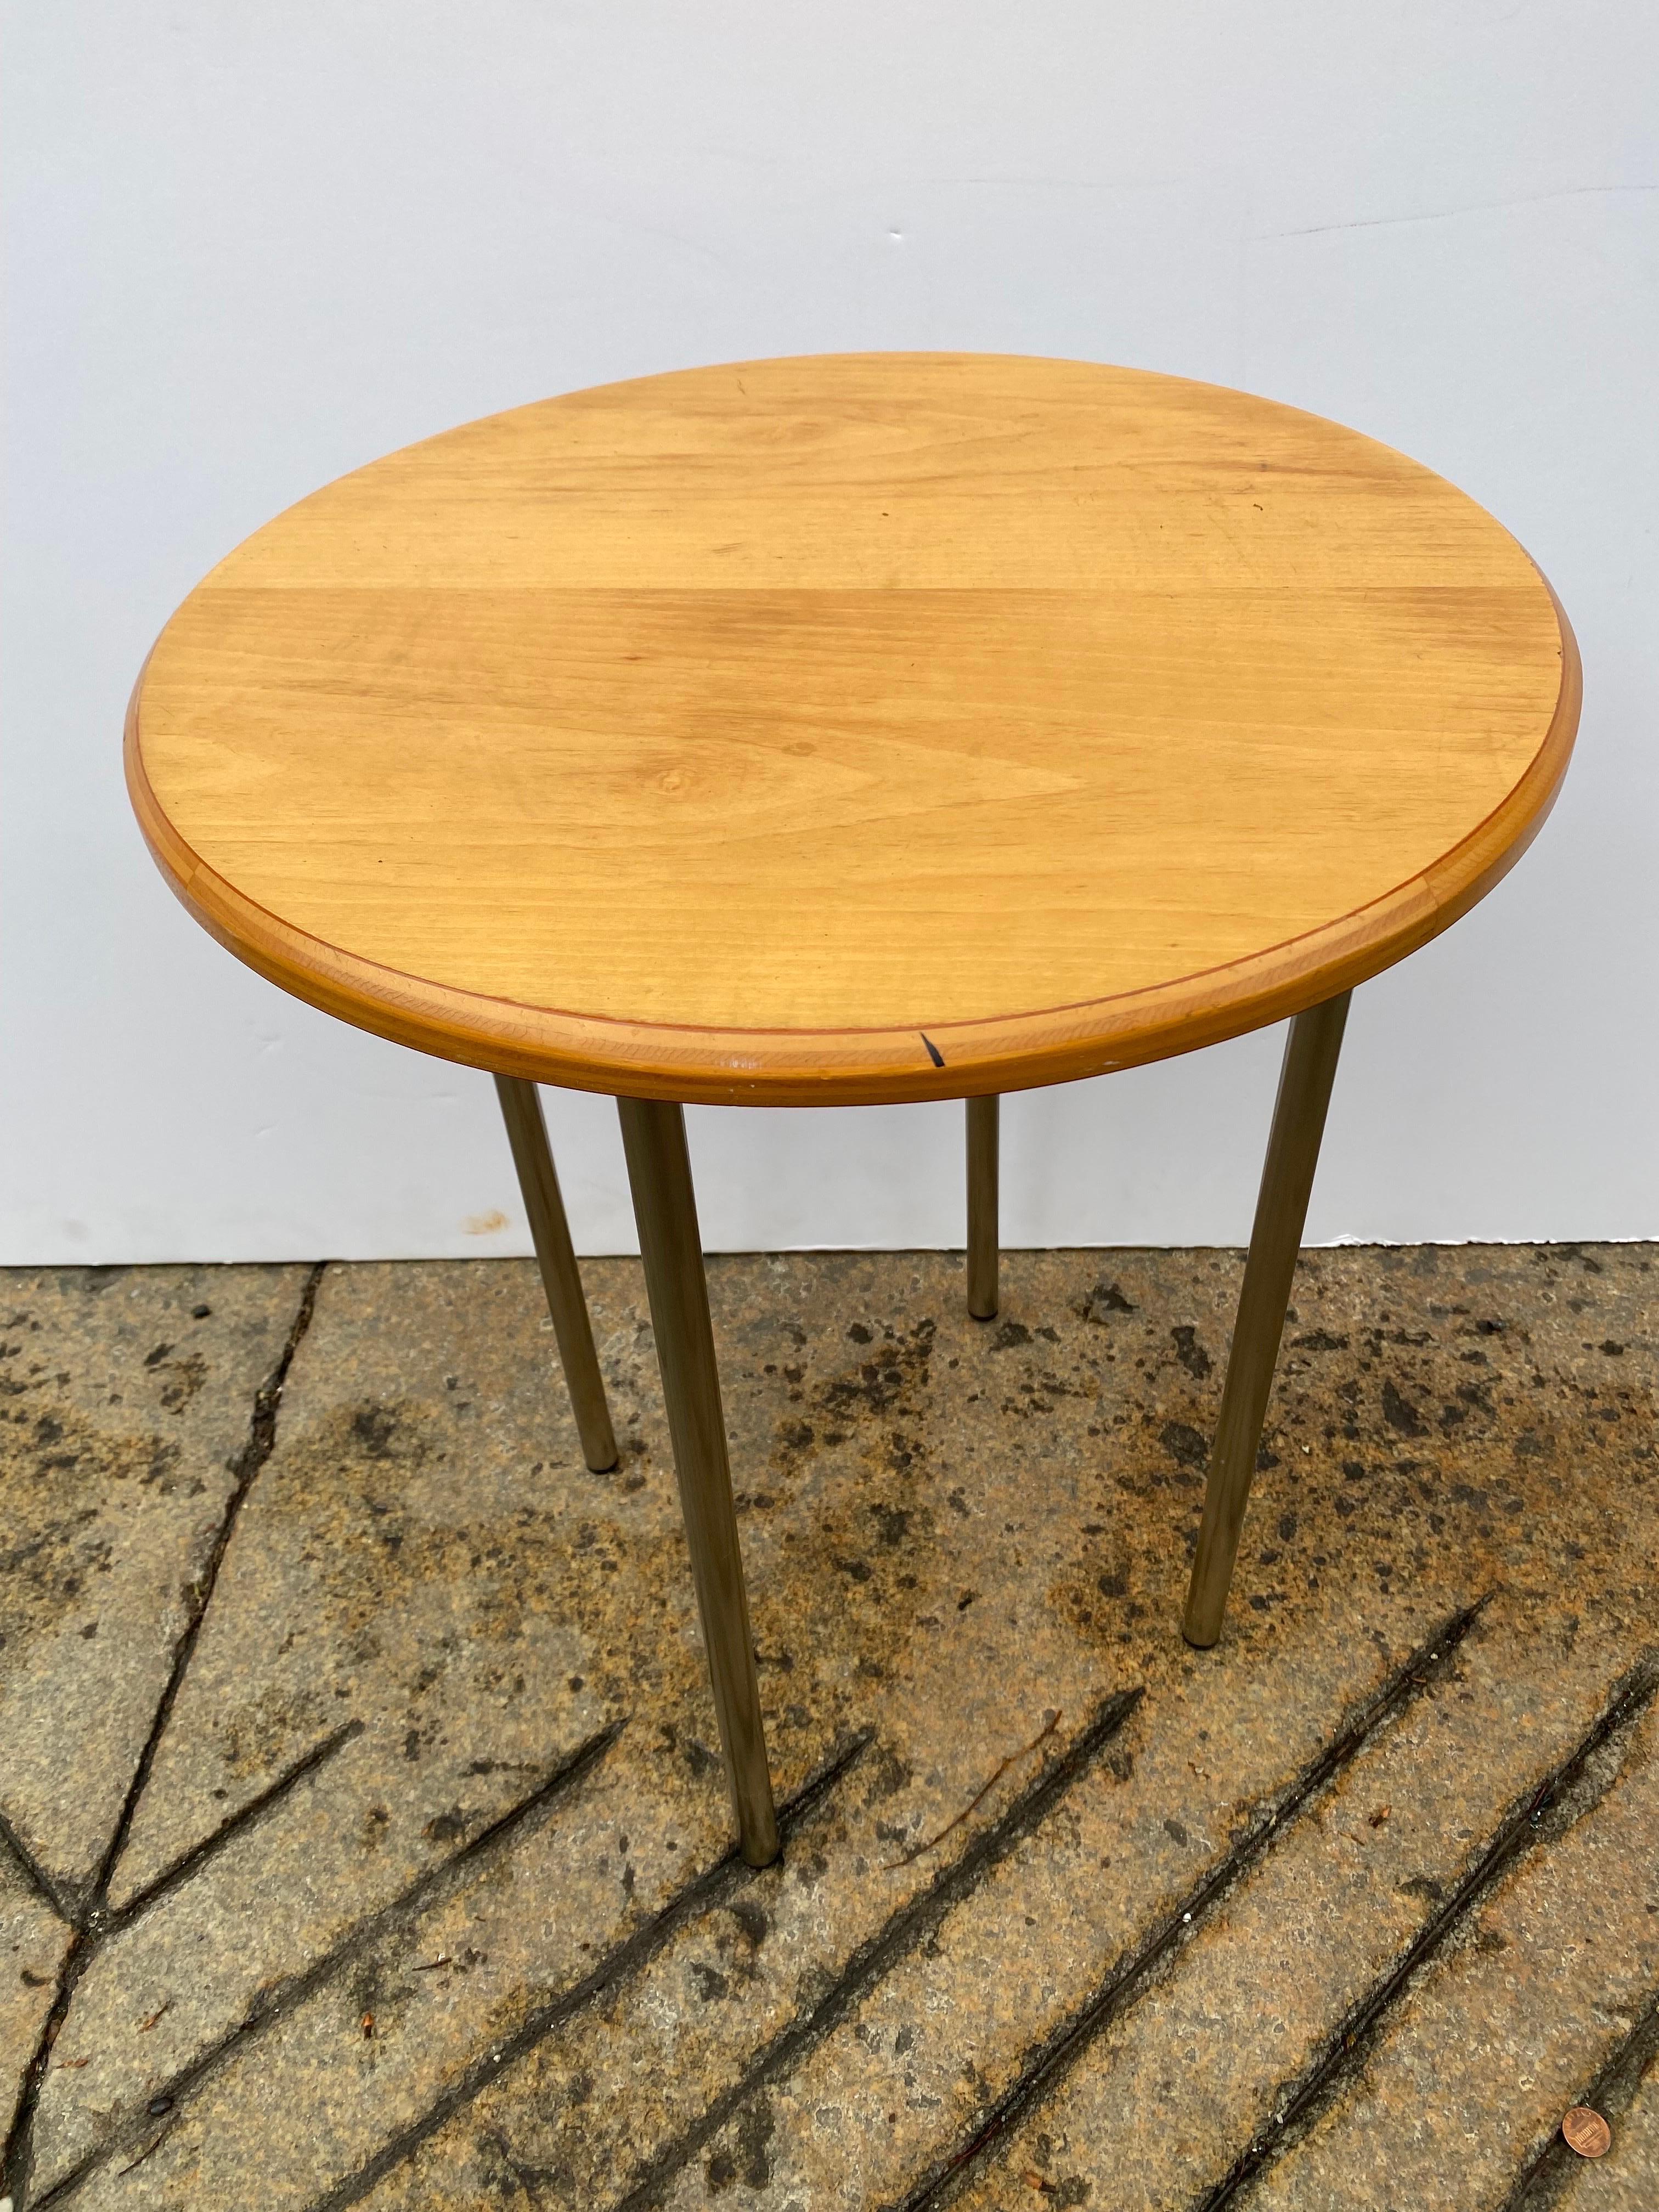 Bernhardt round maple topped side table with square chrome stock. Simple useful design!